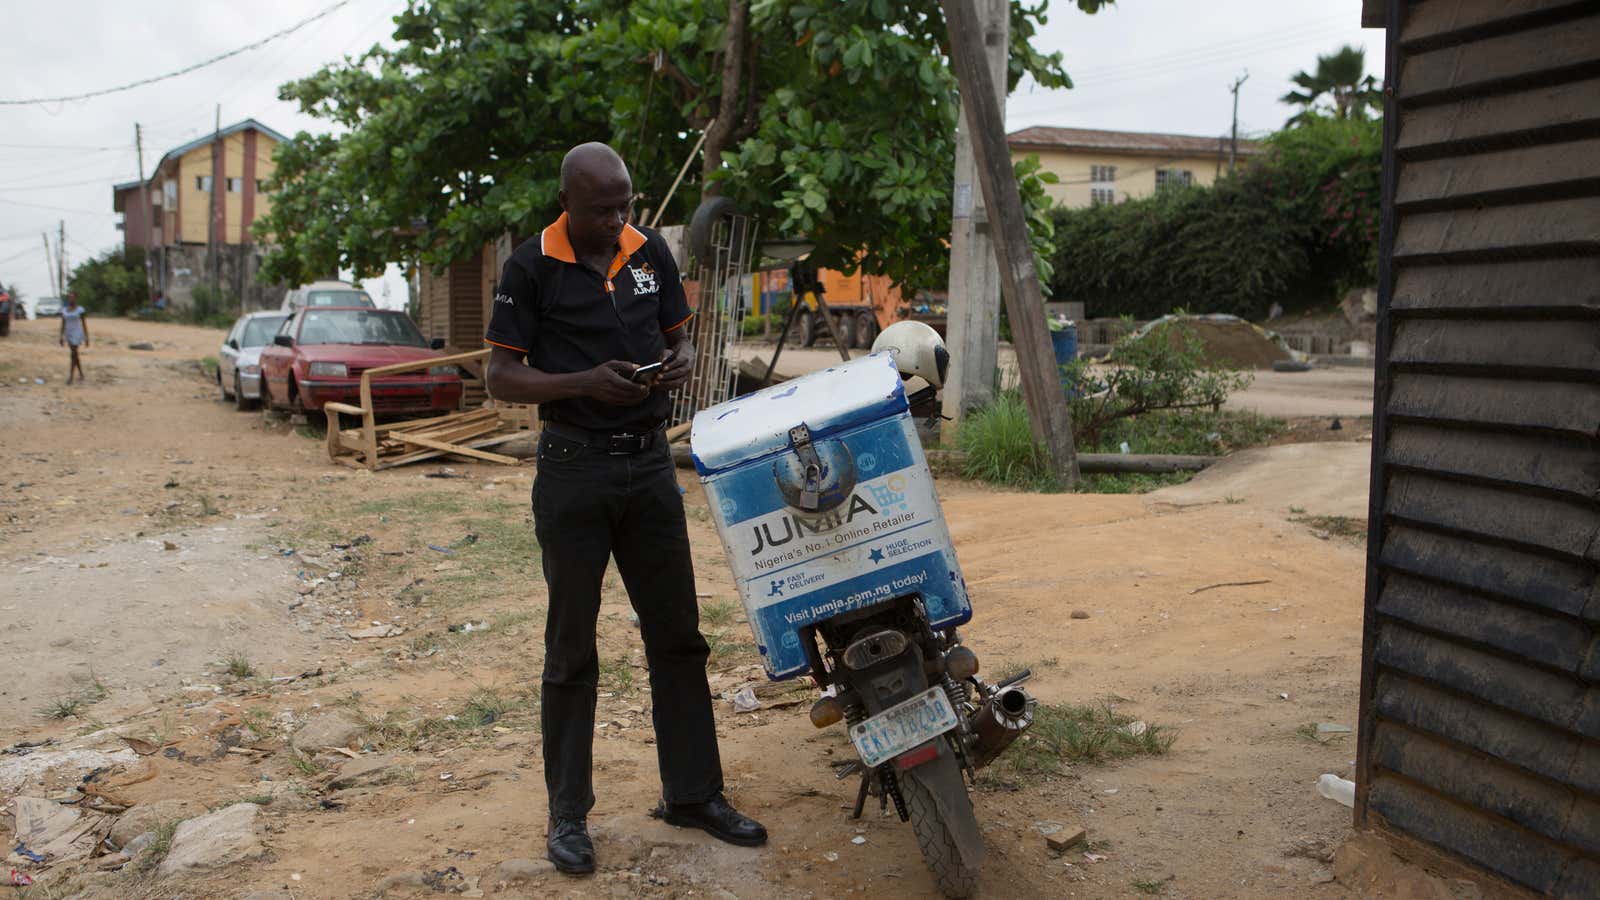 Moses Udoh, an employee of online retailer Jumia, makes a delivery by motorcycle in Lagos February 16, 2015. The growth of Africa’s middle class has…